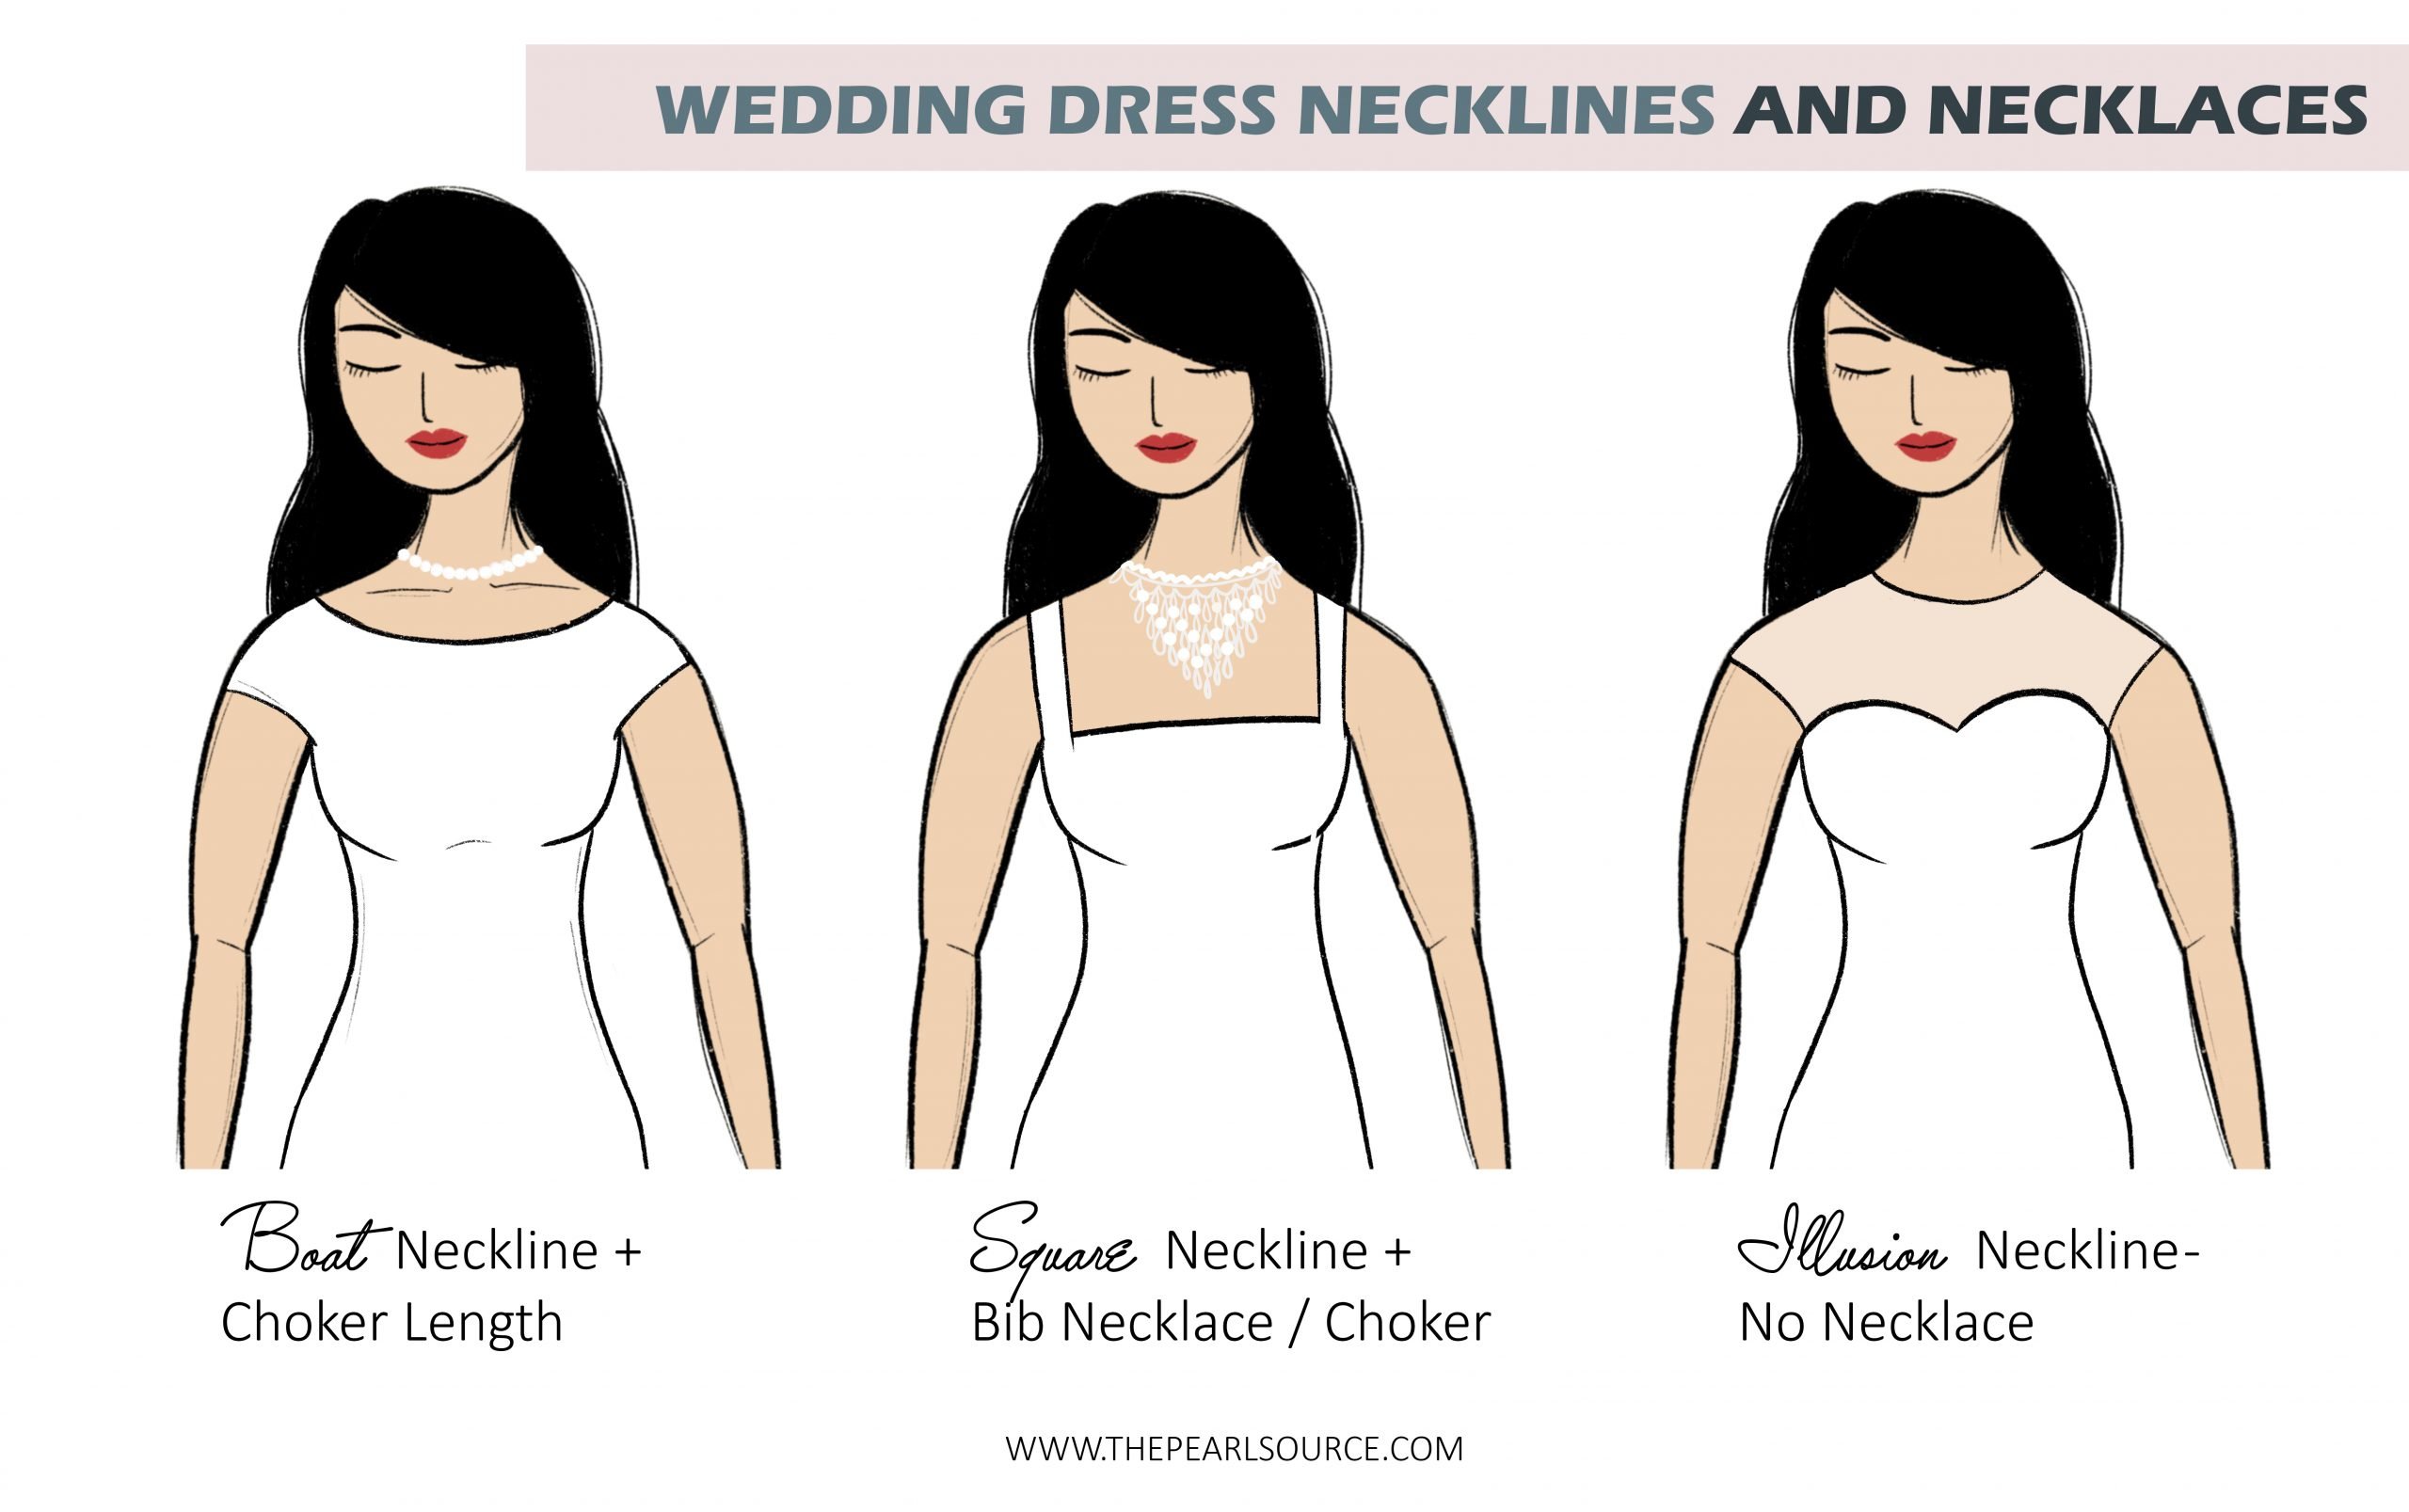 These creative ways to cover up a deep neckline are sure to leave